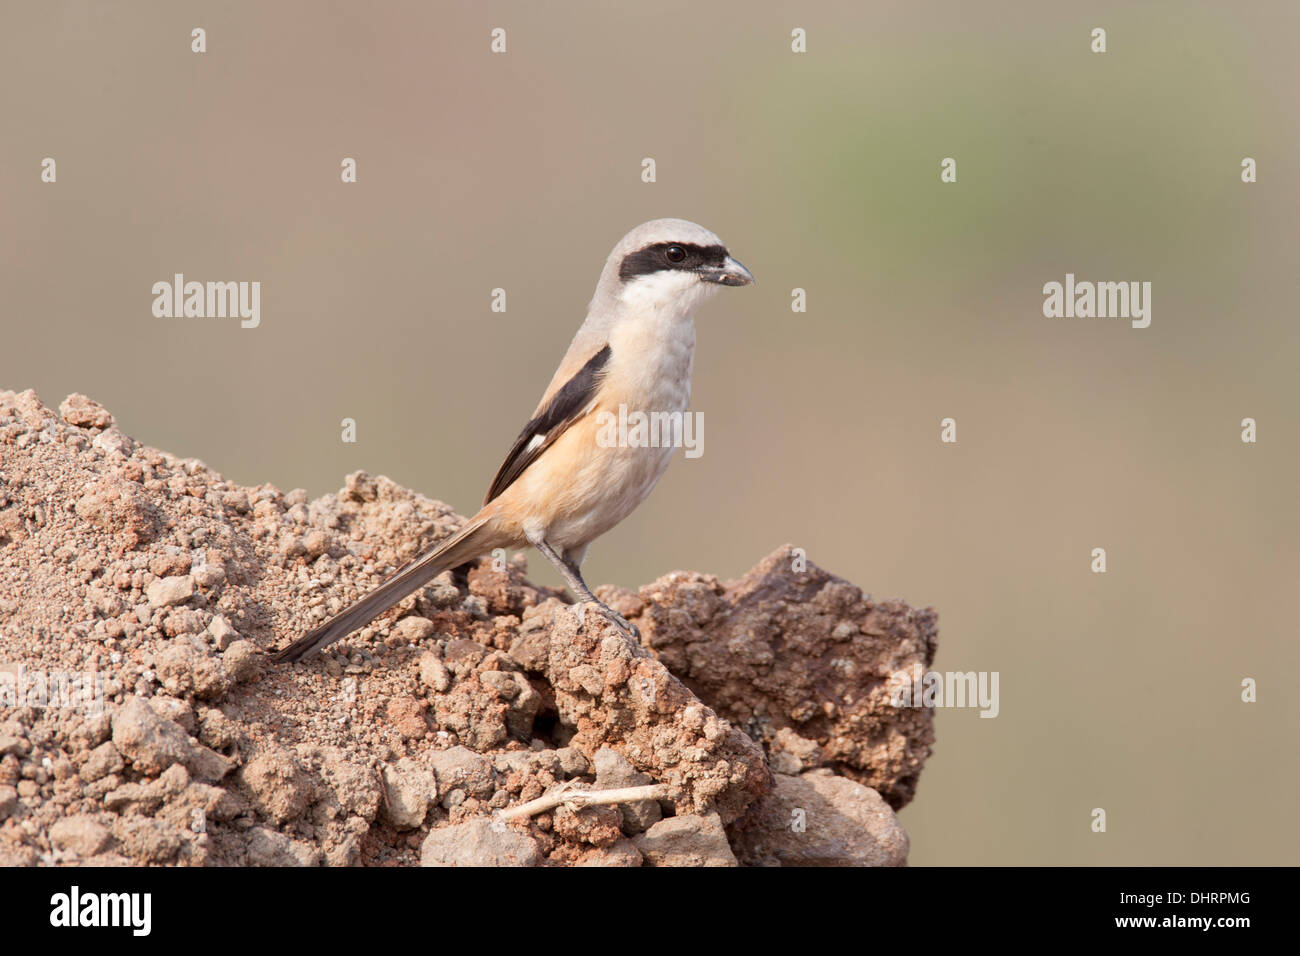 The Long-tailed Shrike or Rufous-backed Shrike (Lanius schach)  on a rock at Uran , a habitat which is both marshy and grassland Stock Photo